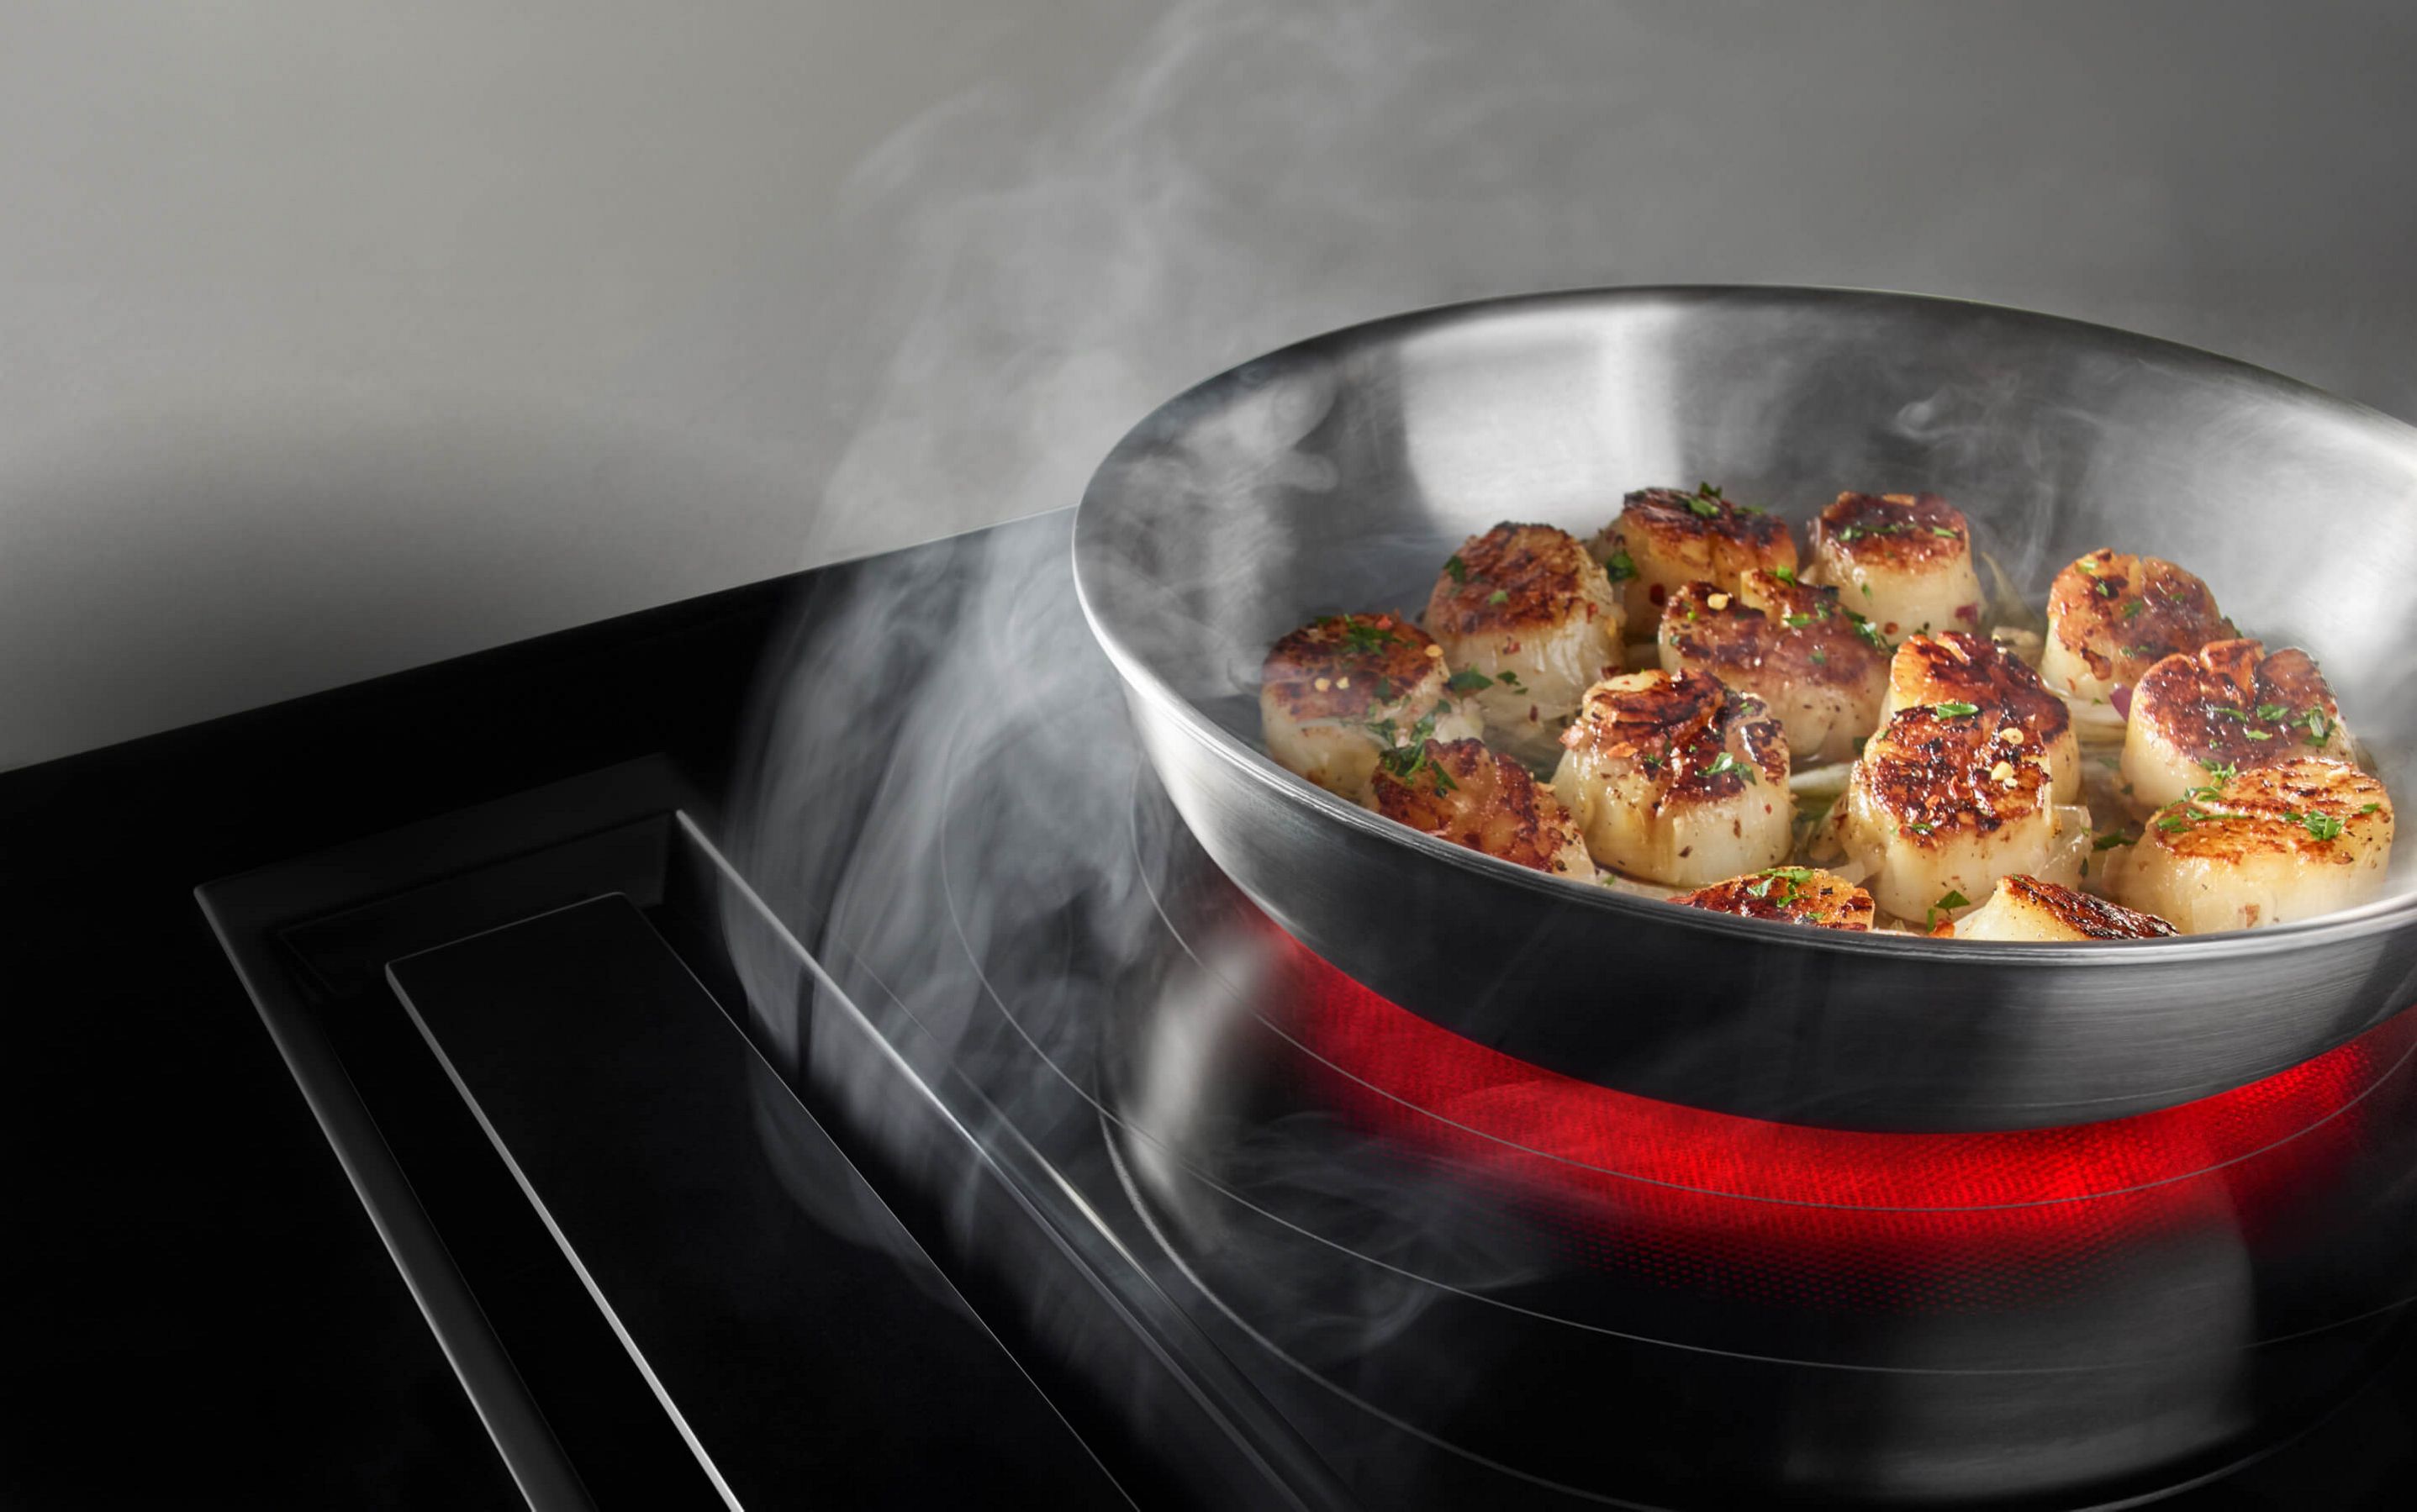 induction hob with wok burner from professional mfgr AT Cooker